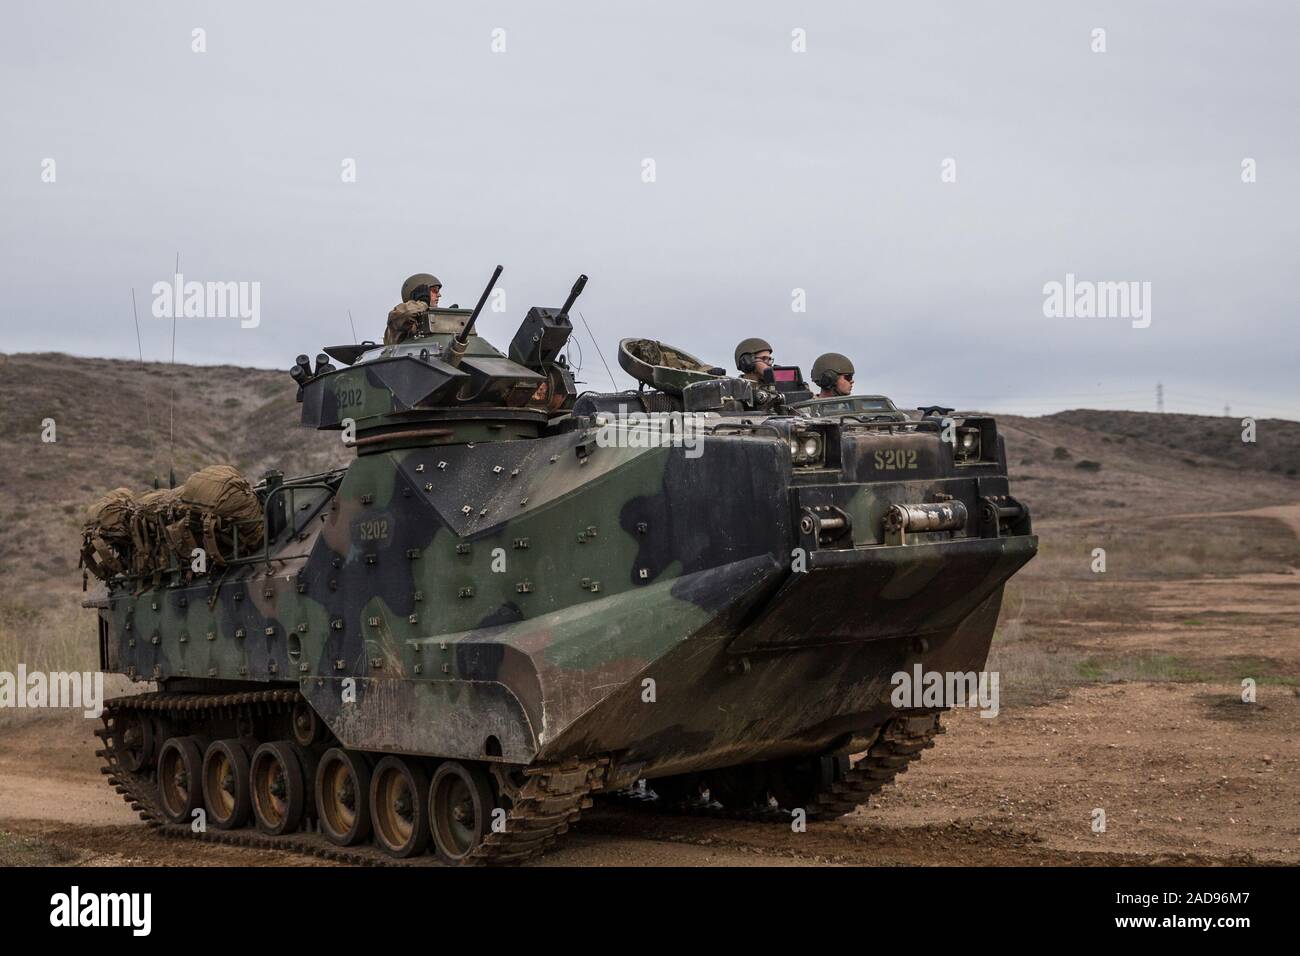 U.S. Marines with Assault Amphibian School, Training and Education Command, engage in basic land and tactics operations in an AAV-P7/A1 Amphibious Assault Vehicle at the Oscar Two training area on Marine Corps Base Camp Pendleton, California, Dec. 2, 2019. This training teaches students how to operate AAVs on land and employ them in a tactical formation. (U.S. Marine Corps photo by Lance Cpl. Angela Wilcox) Stock Photo